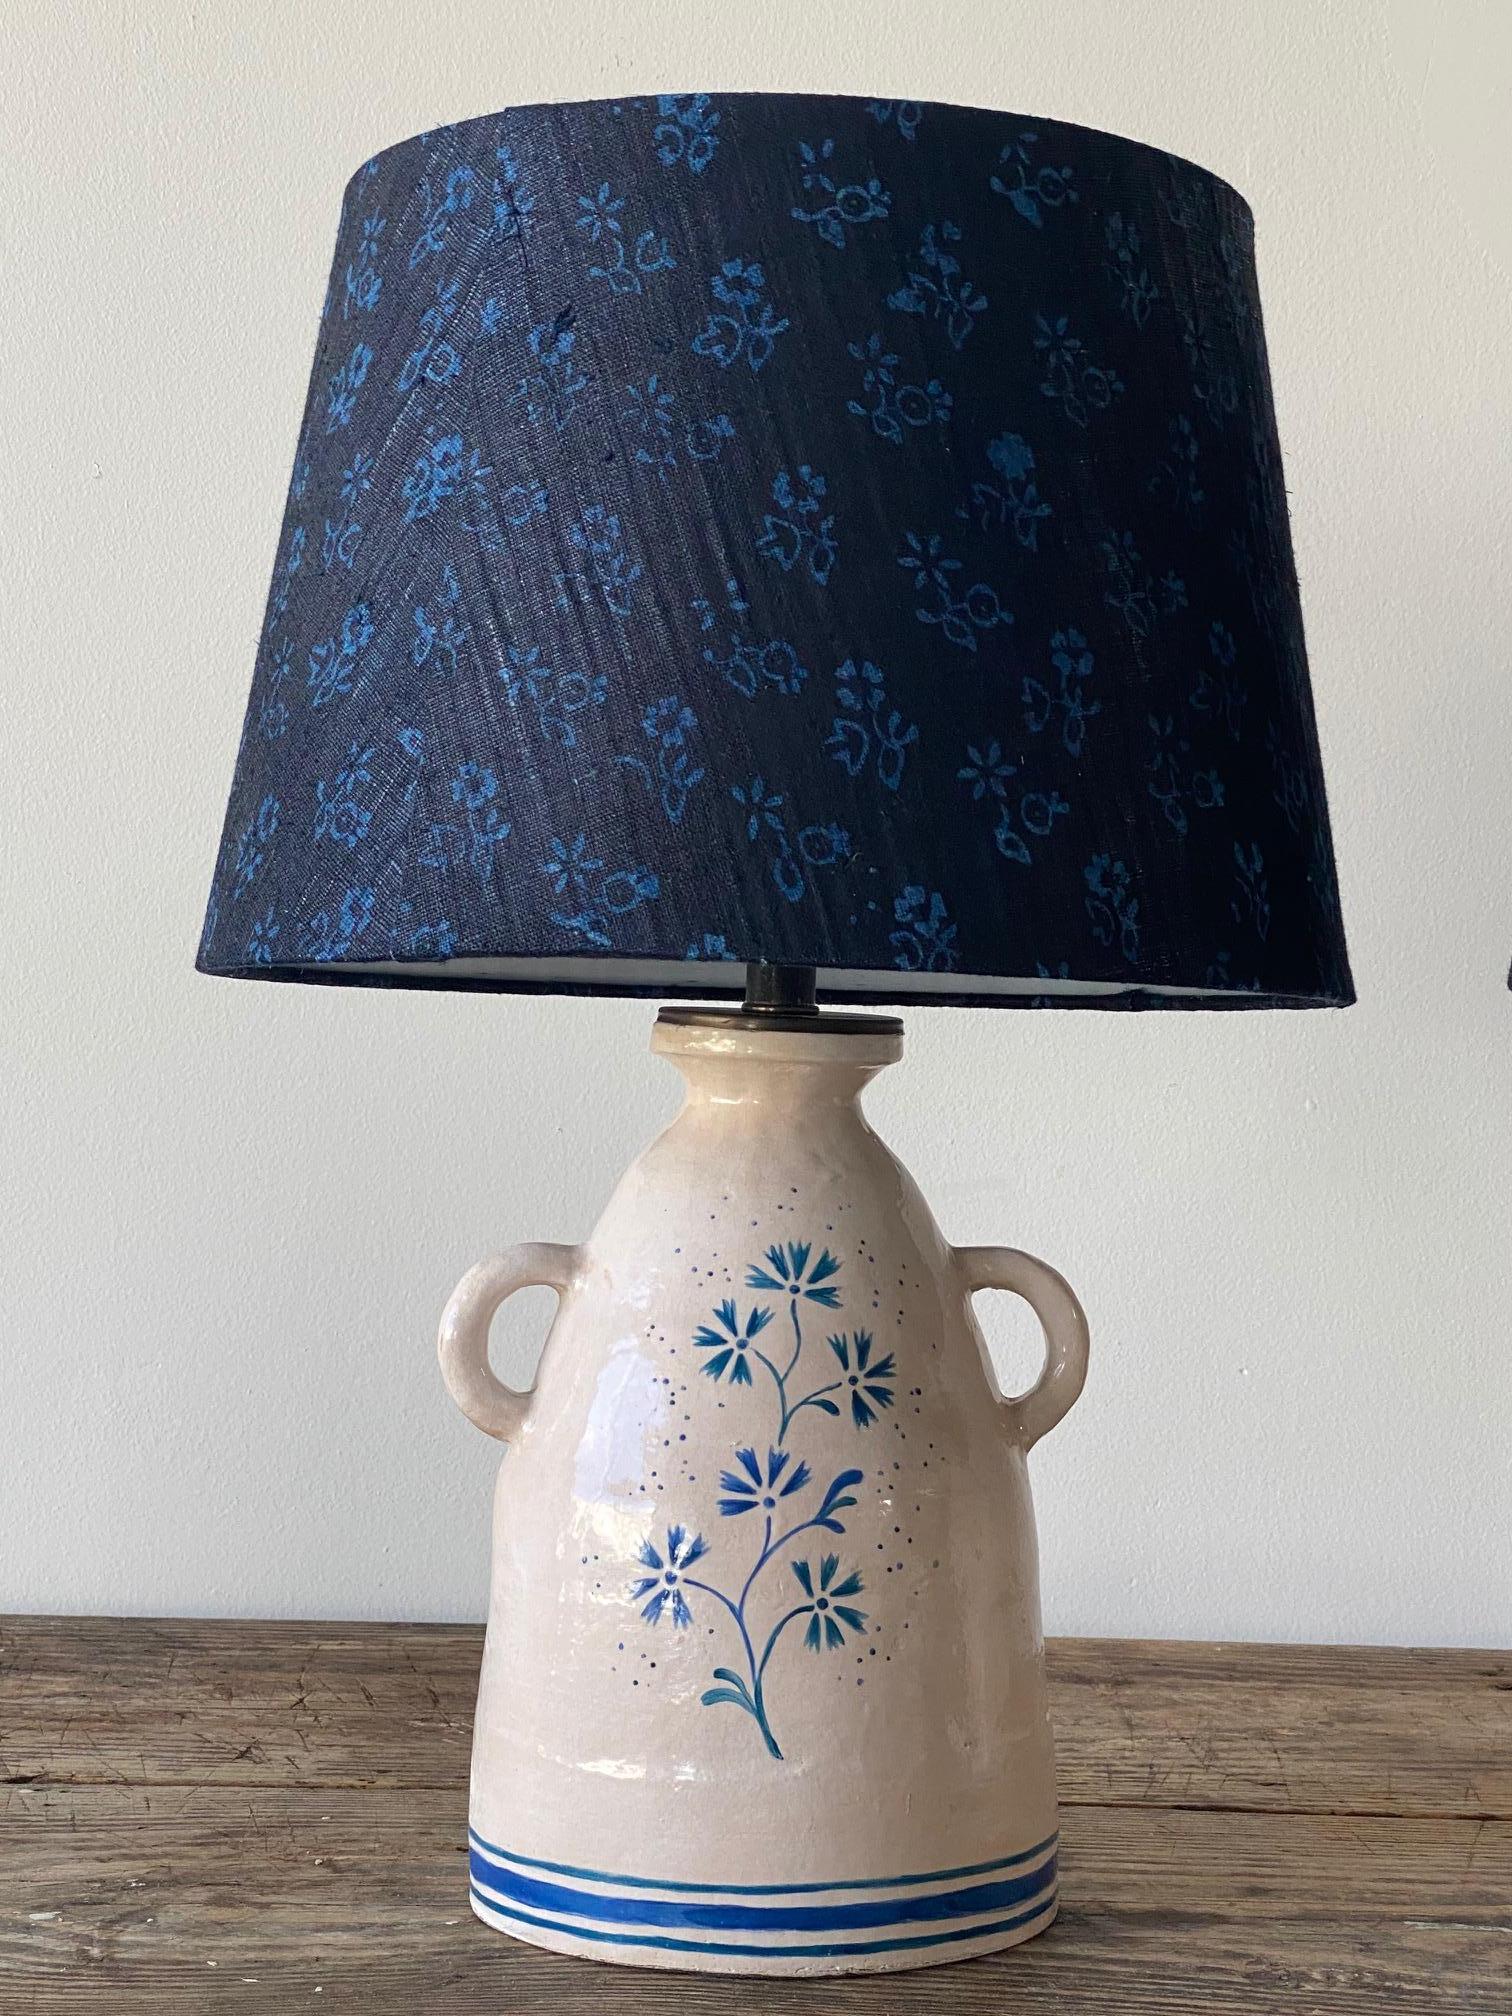 Beautiful pair of custom ceramic table lamps by Alix Soubiran. The lamps are hand painted, custom navy and blue shade provided, the shade is made from vintage French fabric. The lamps come with brown twist cord. The lamp base measures 7